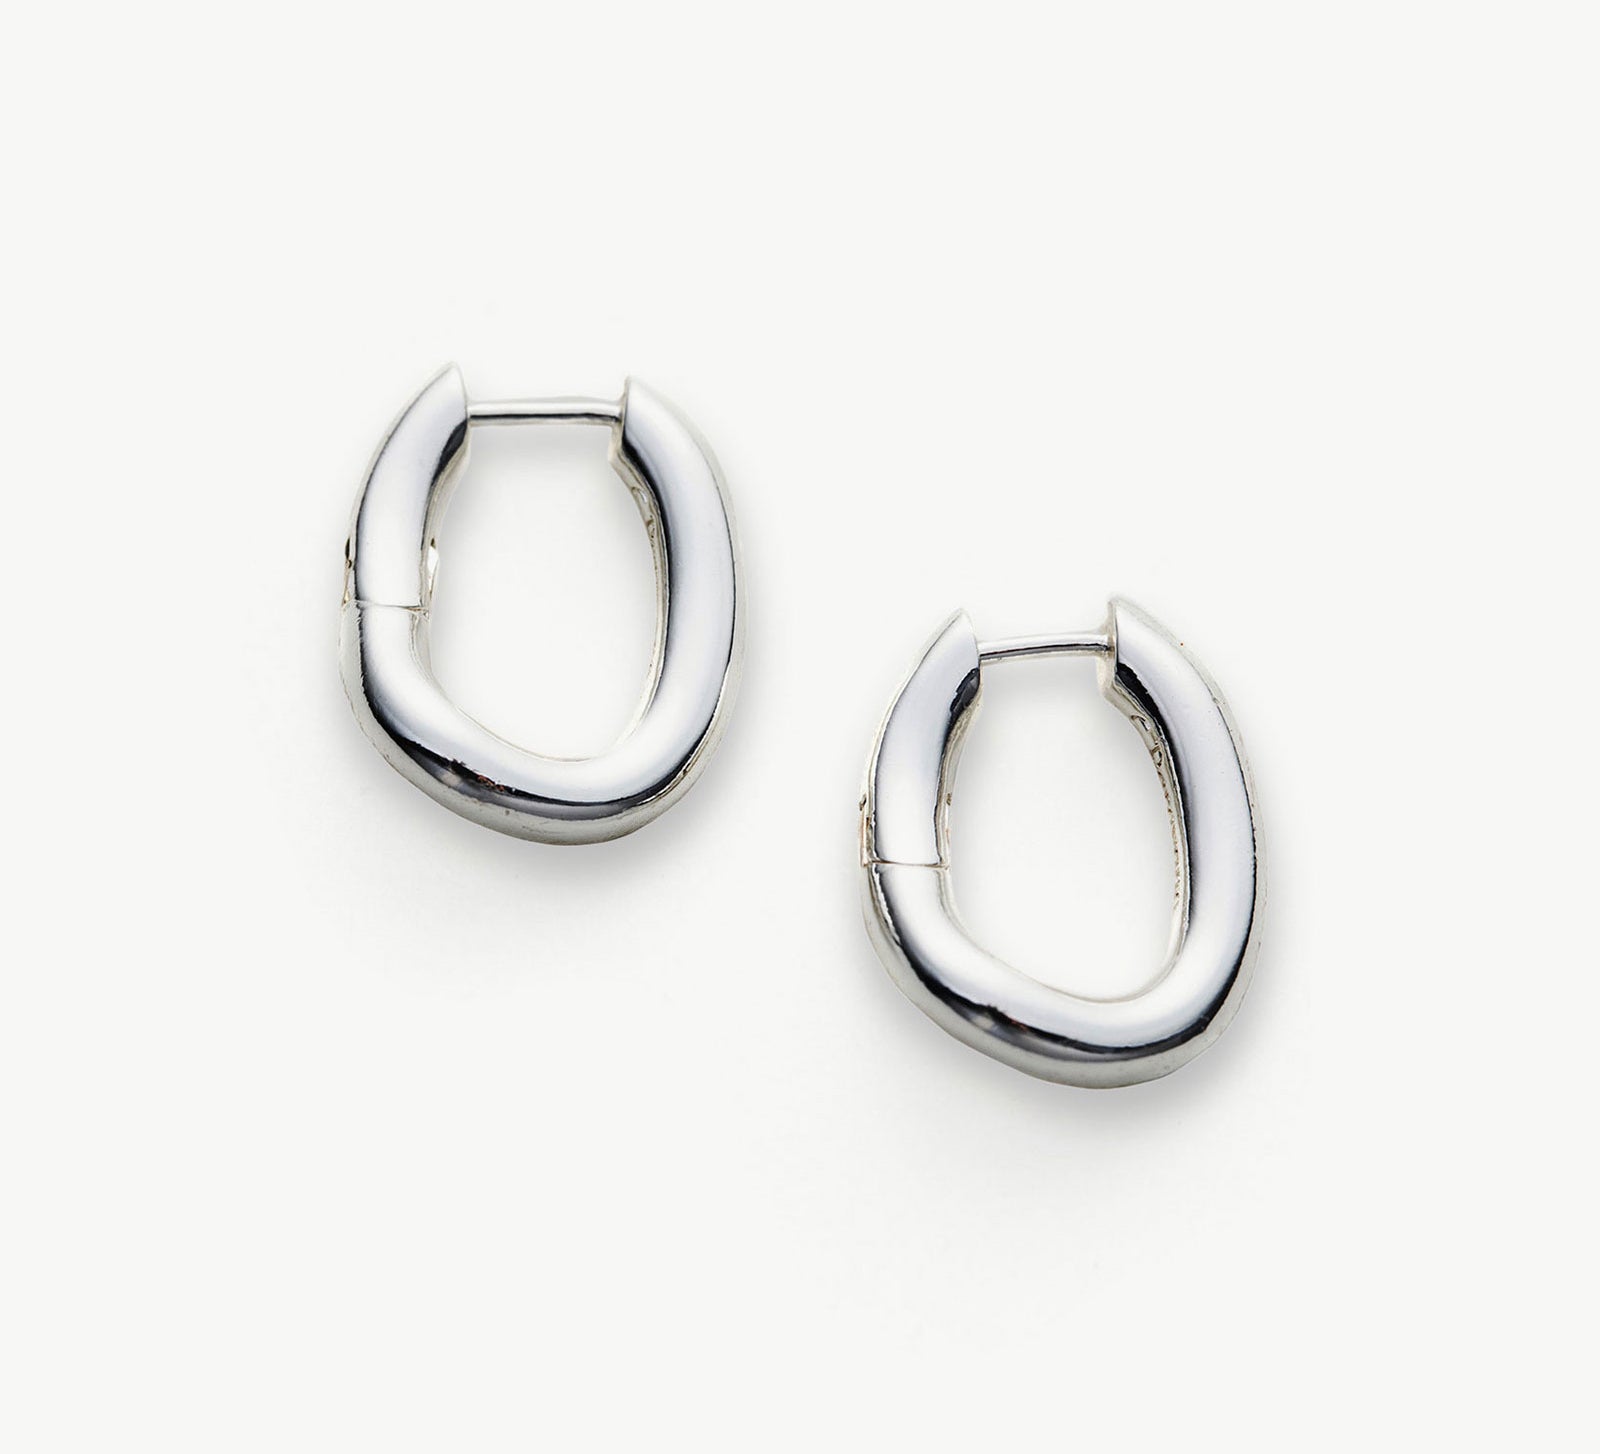 Tunnel Hoop Earrings in Silver, timeless classics that capture the enduring beauty of silver hoops, providing a versatile and stylish accessory for any look